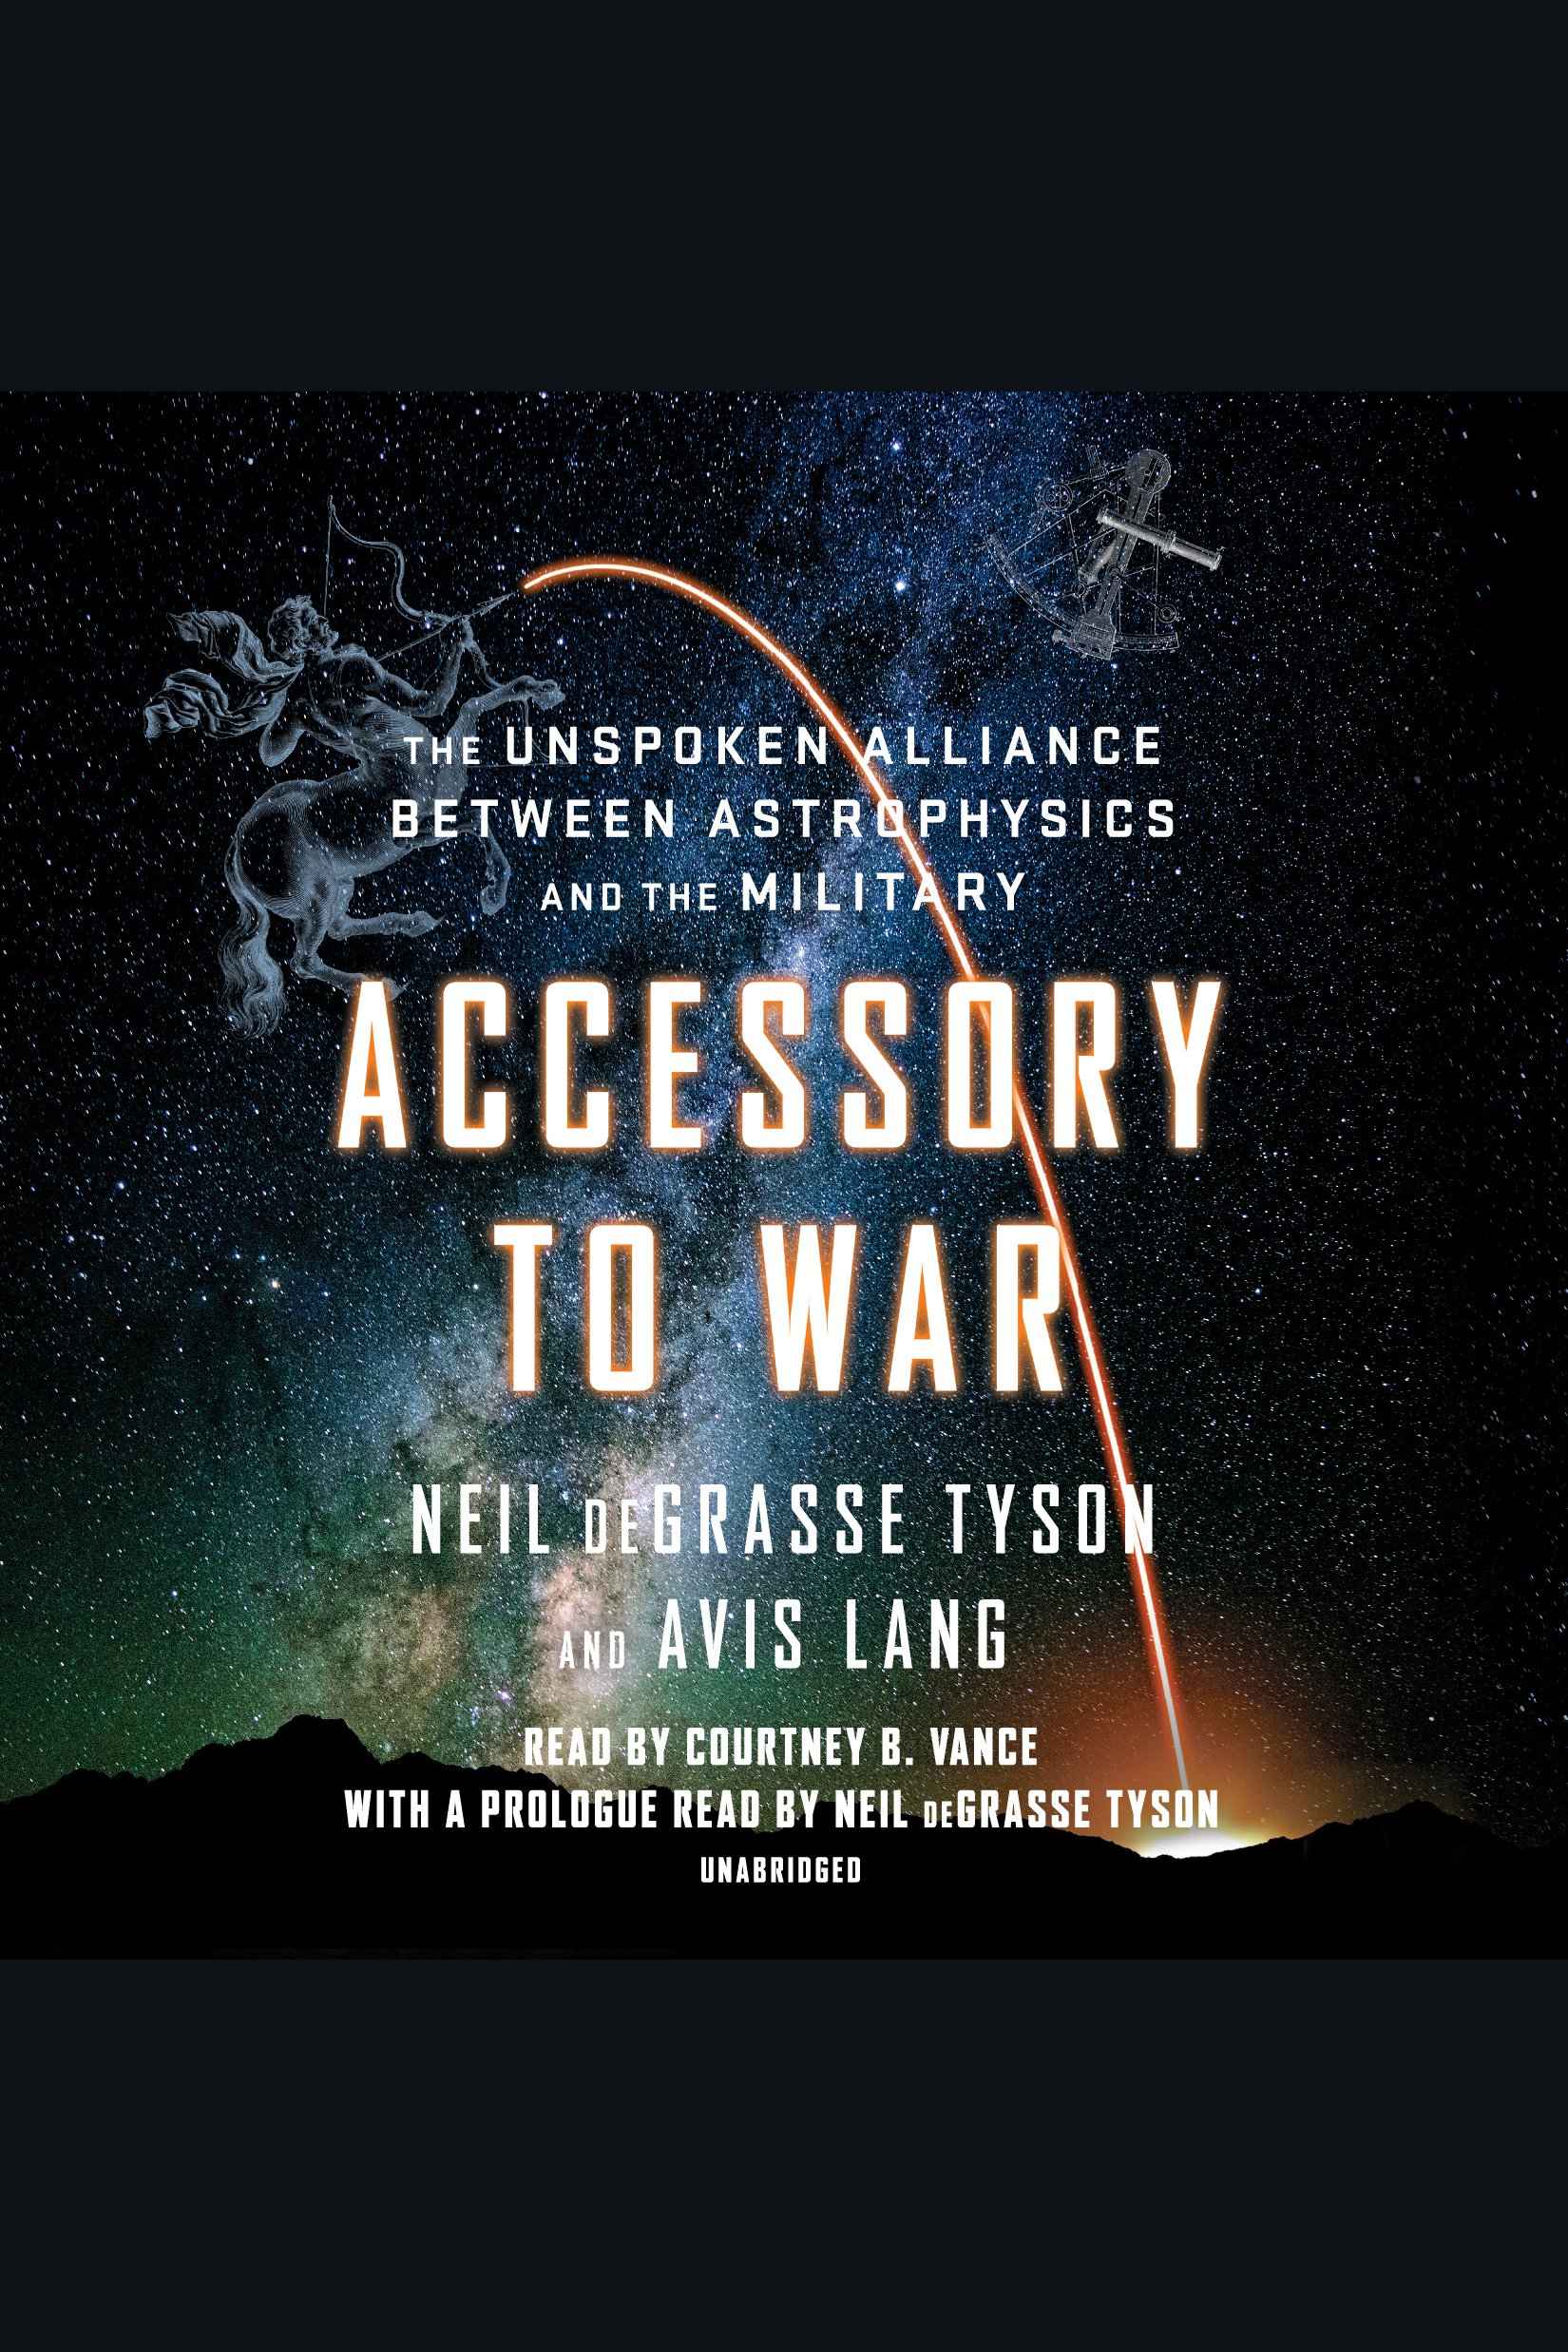 Accessory to war the unspoken alliance between astrophysics and the military cover image